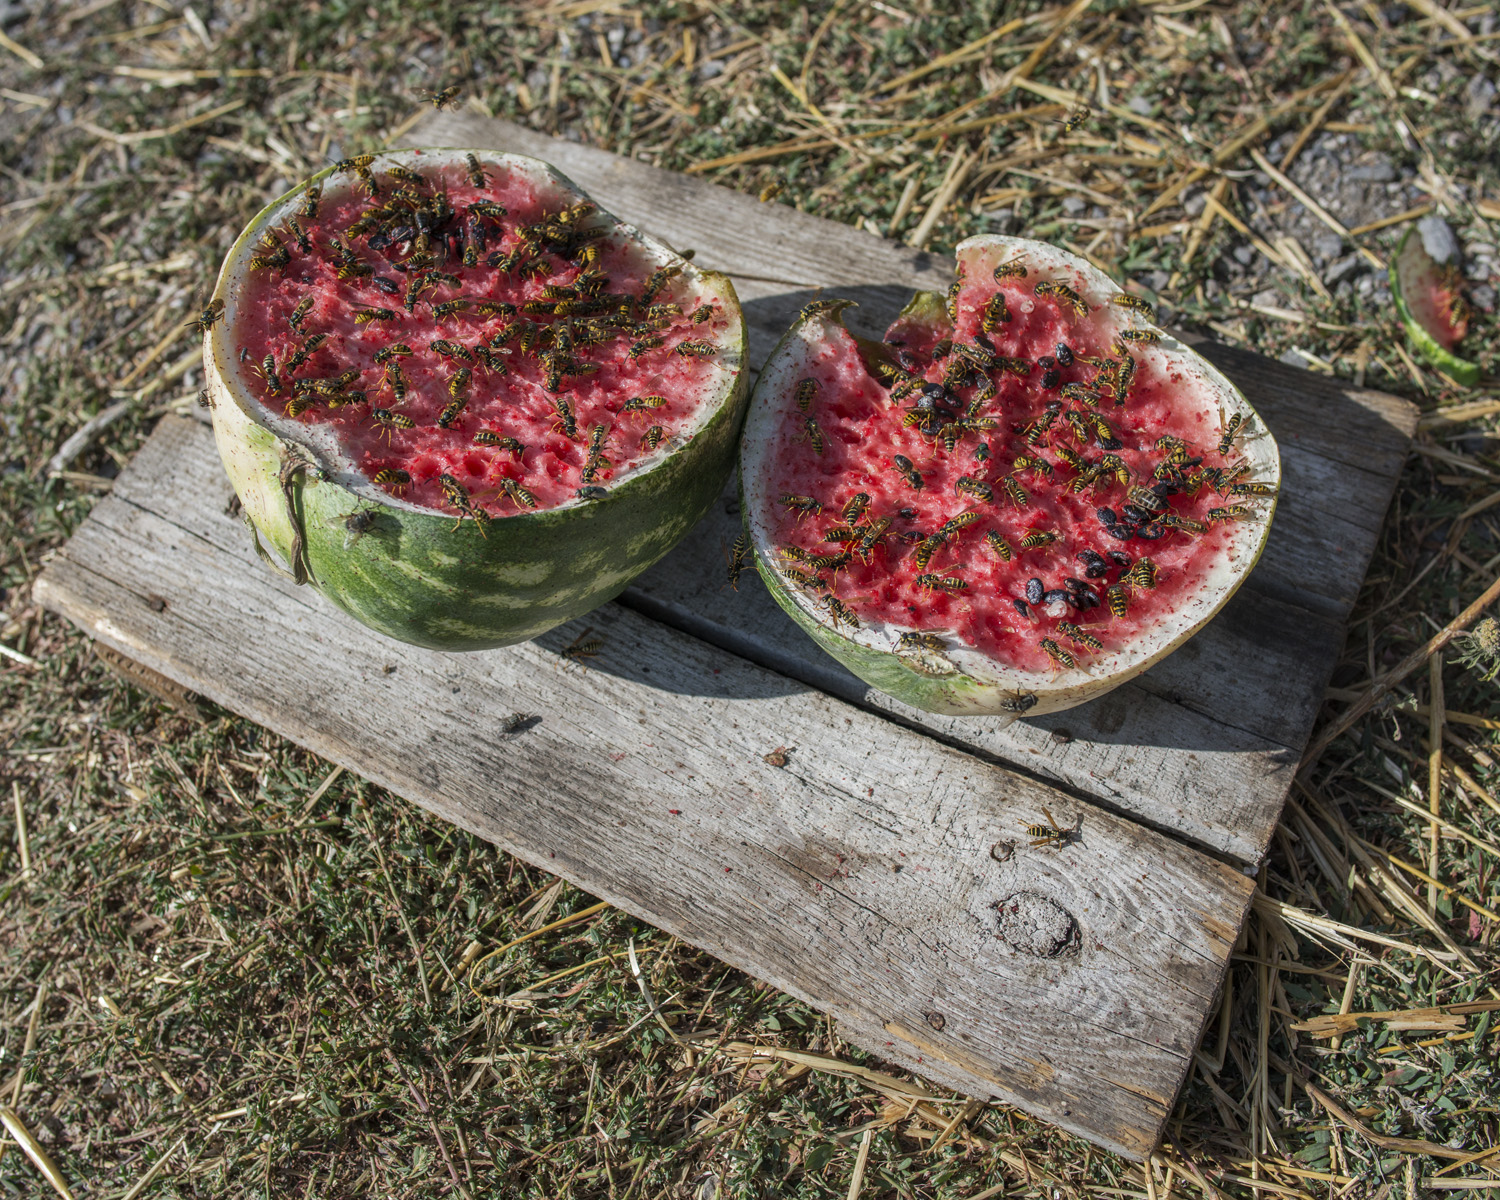  A watermelon sits split in half by the side of the road.&nbsp;  "Why should I support the soldiers? They are somebody's children but the other side are also somebody's children. I want to cry." 